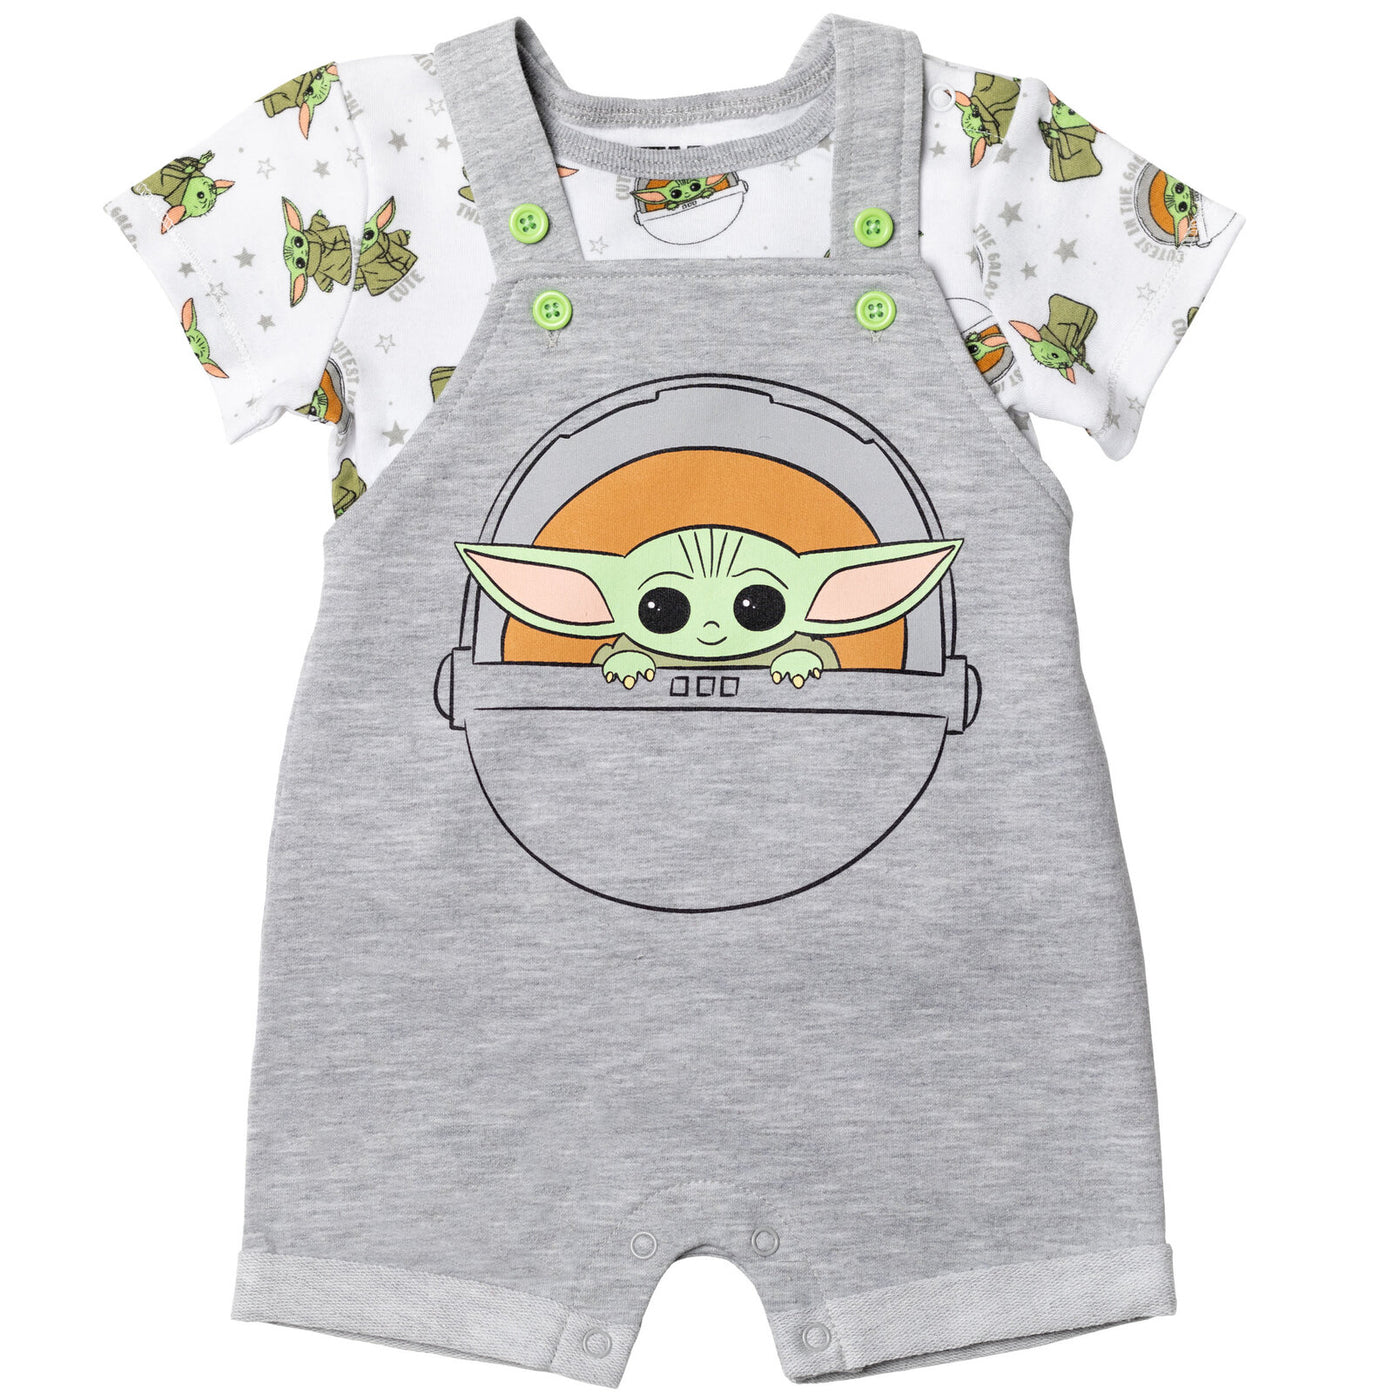 Star Wars Baby Yoda Short Overalls T-Shirt and Hat 3 Piece Outfit Set